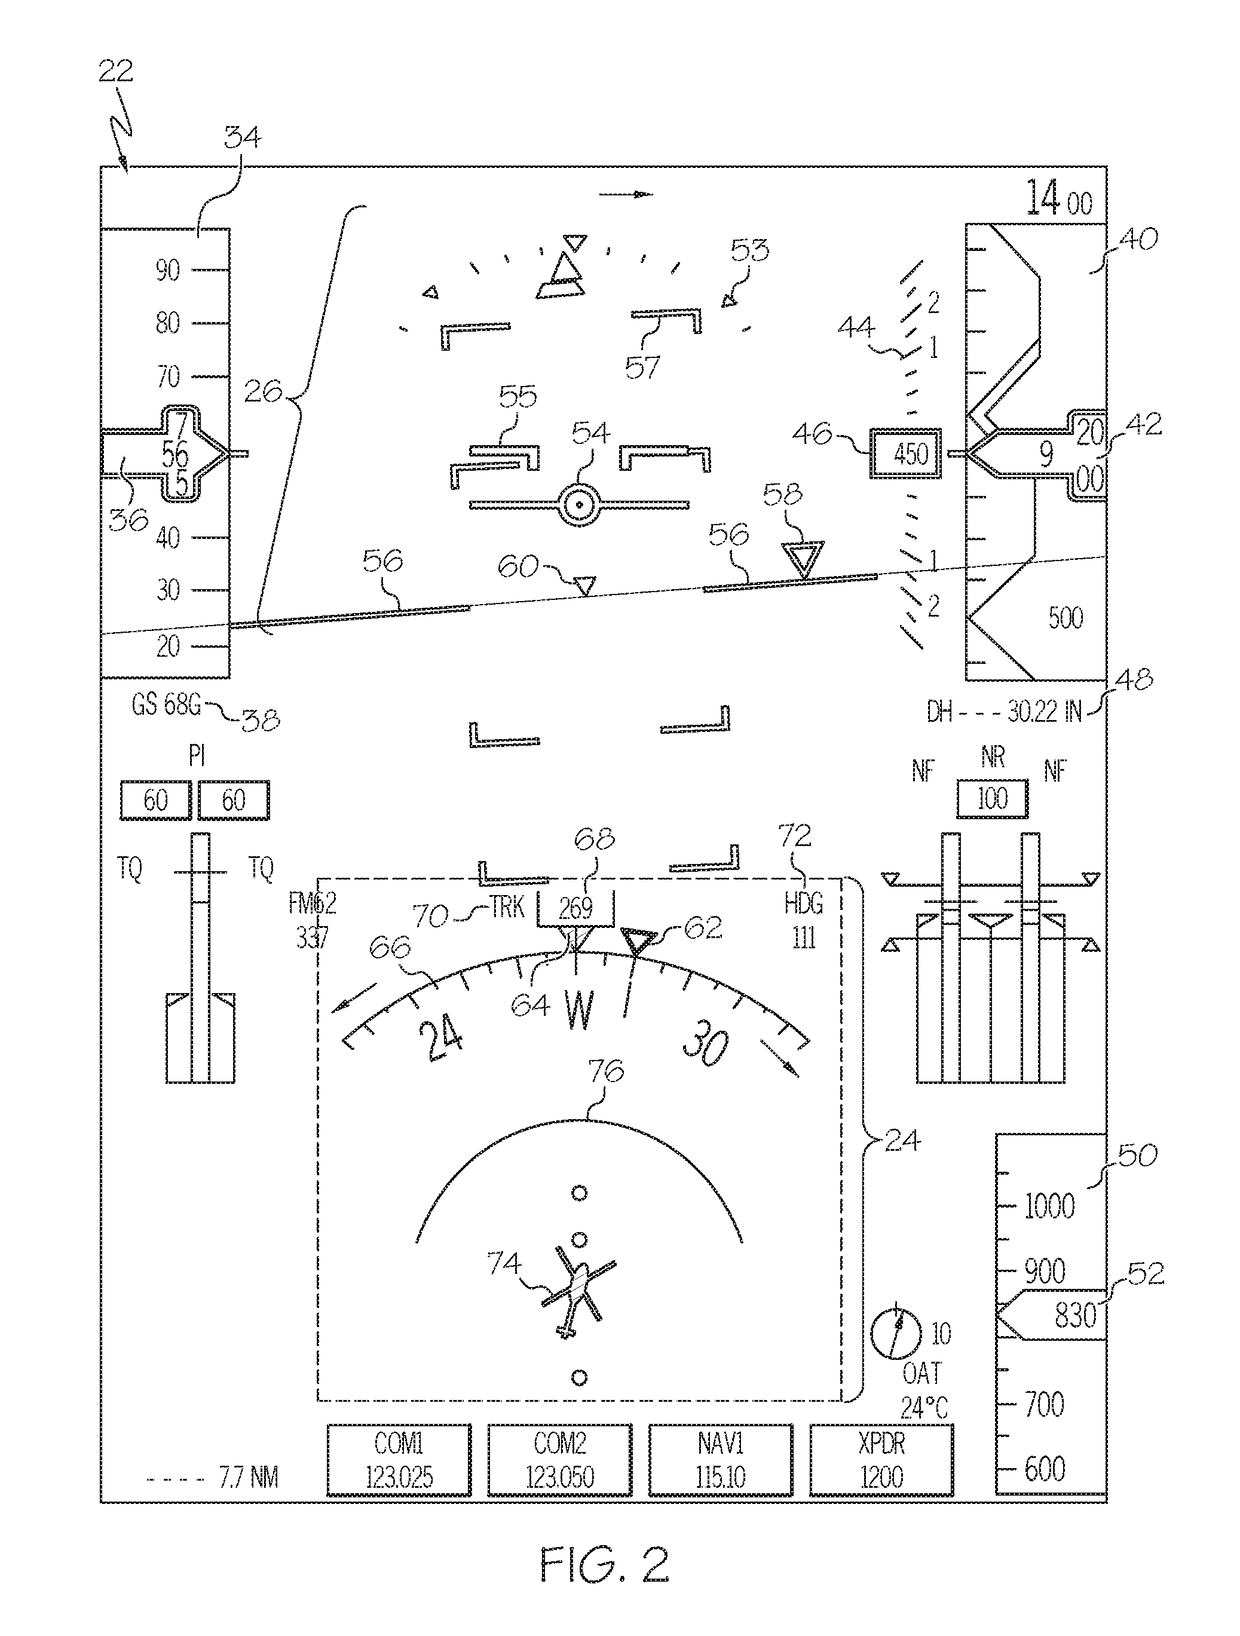 Aircraft display systems and methods for generating horizontal situation indicator graphics with enhanced symbology